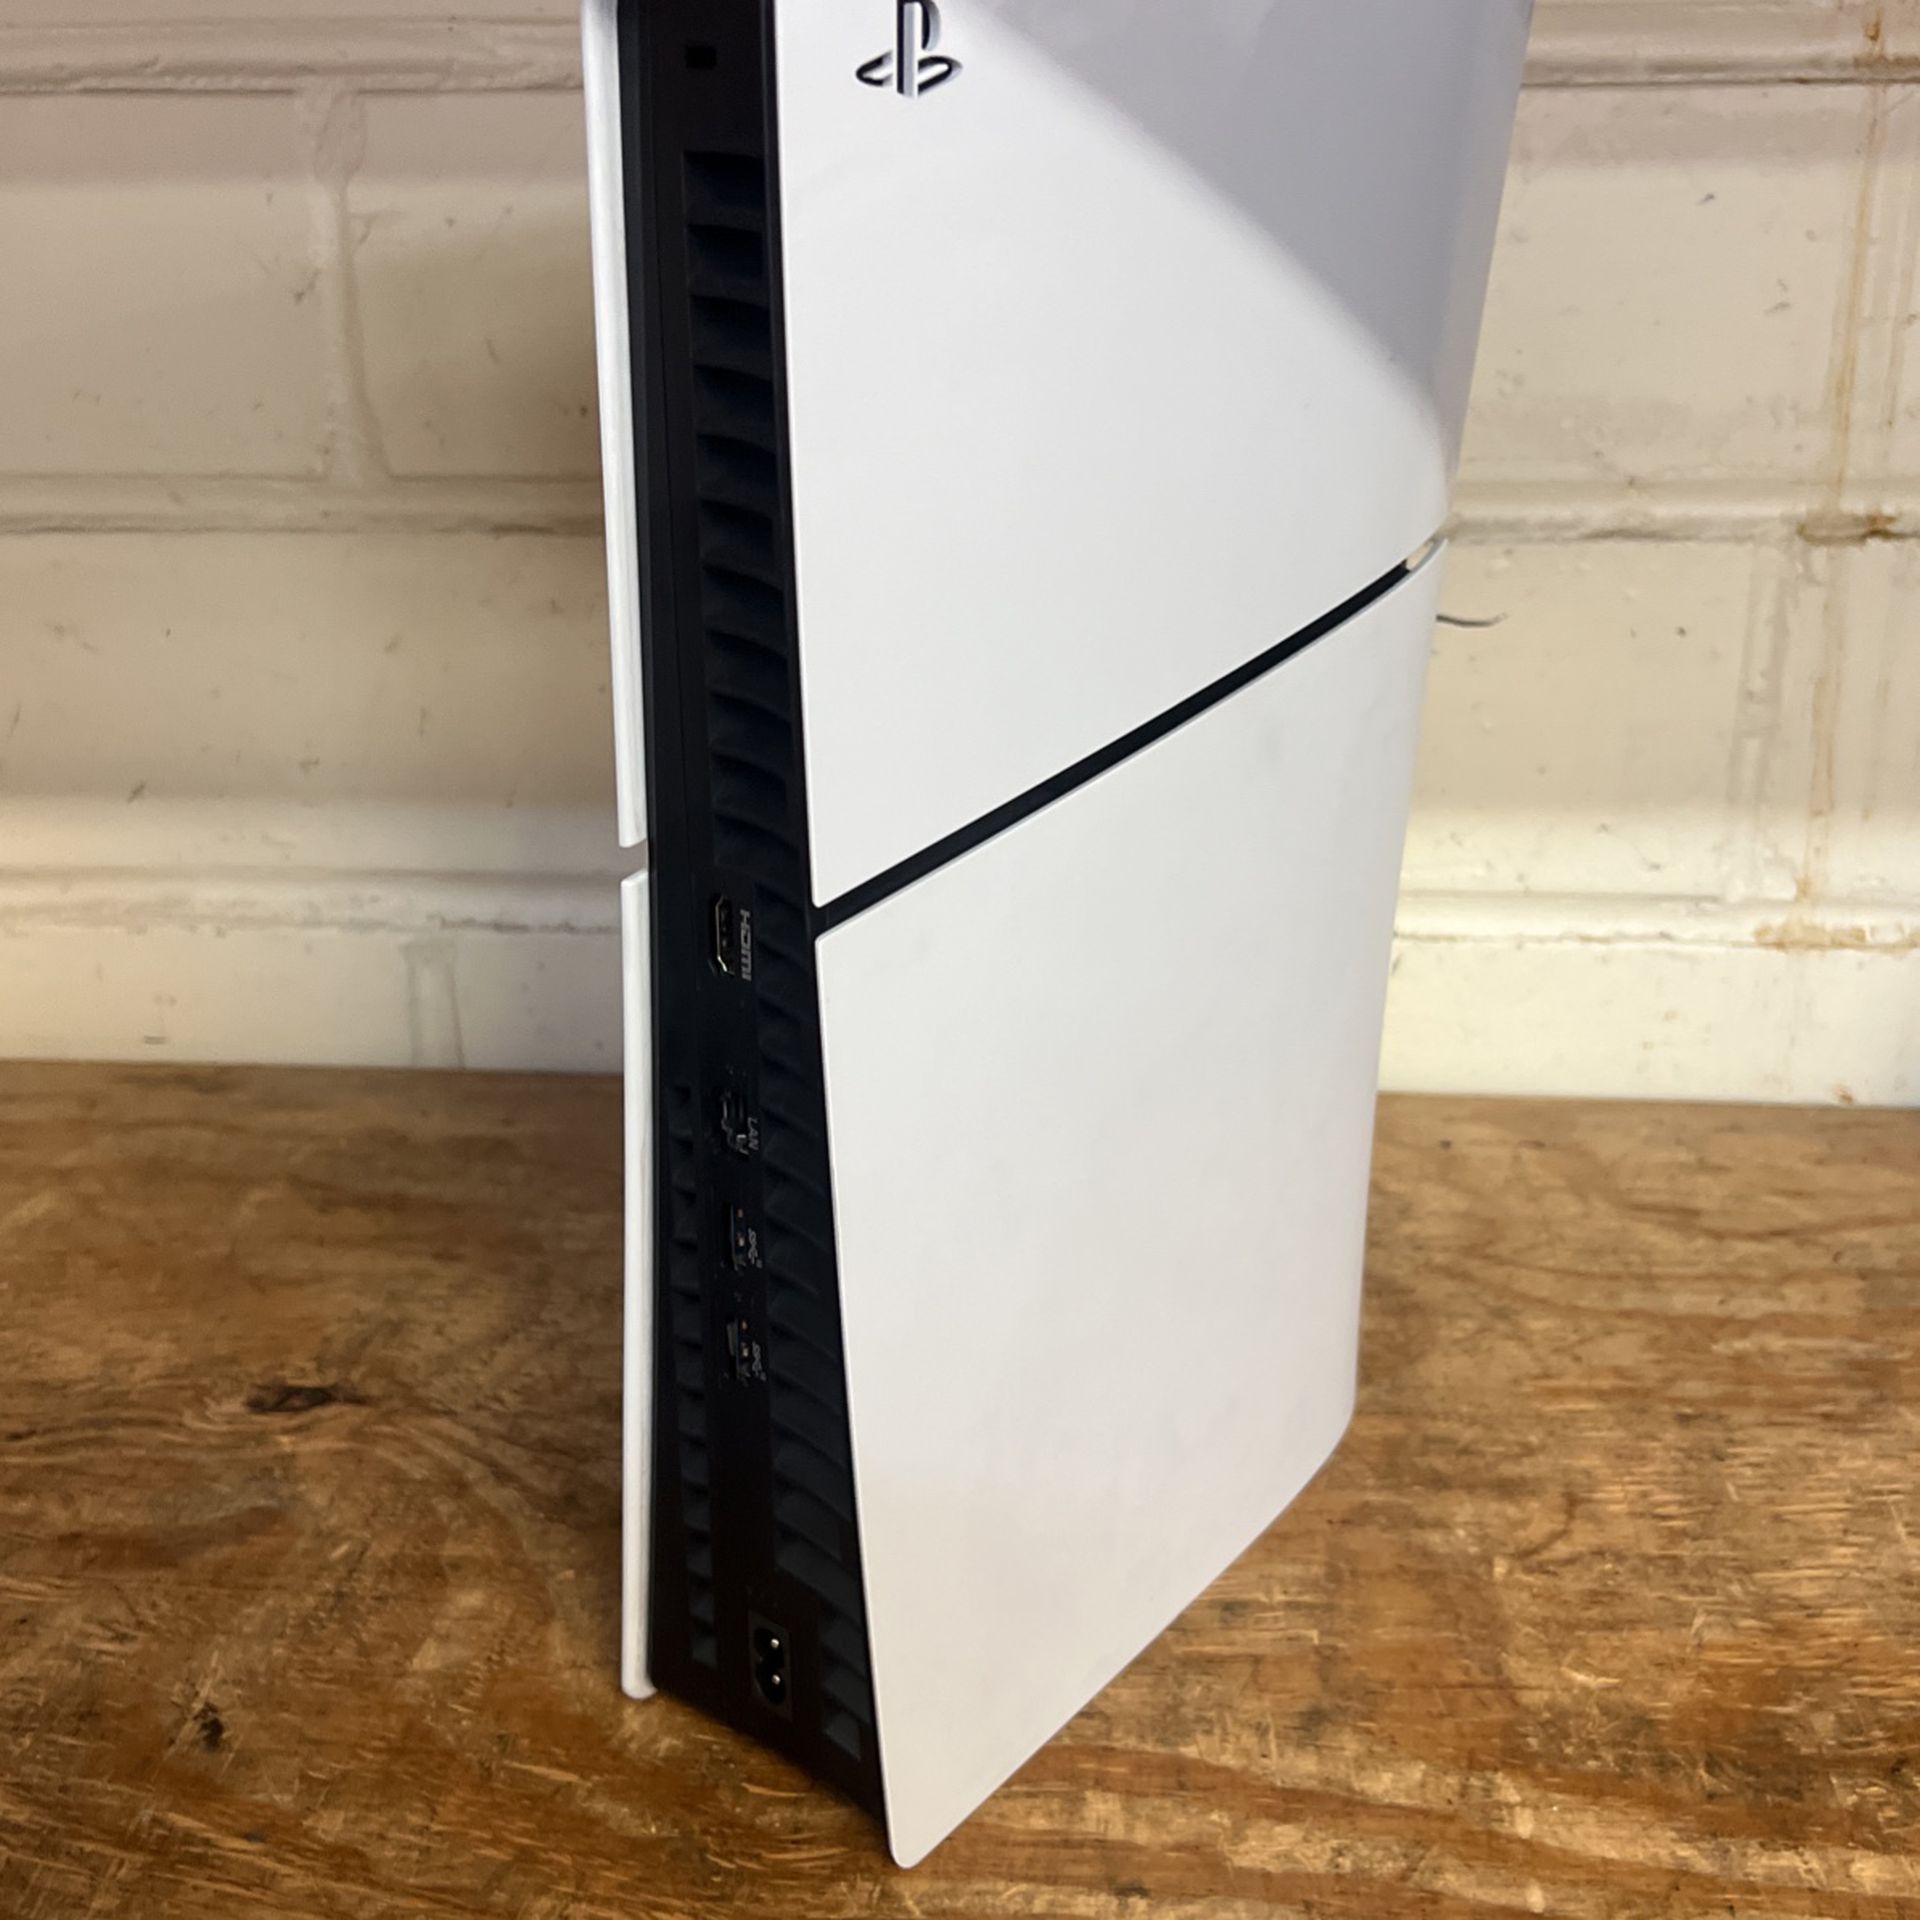 PlayStation 5 Slim Comes With accessories We Offer Pay Over Time With FlexApproved 